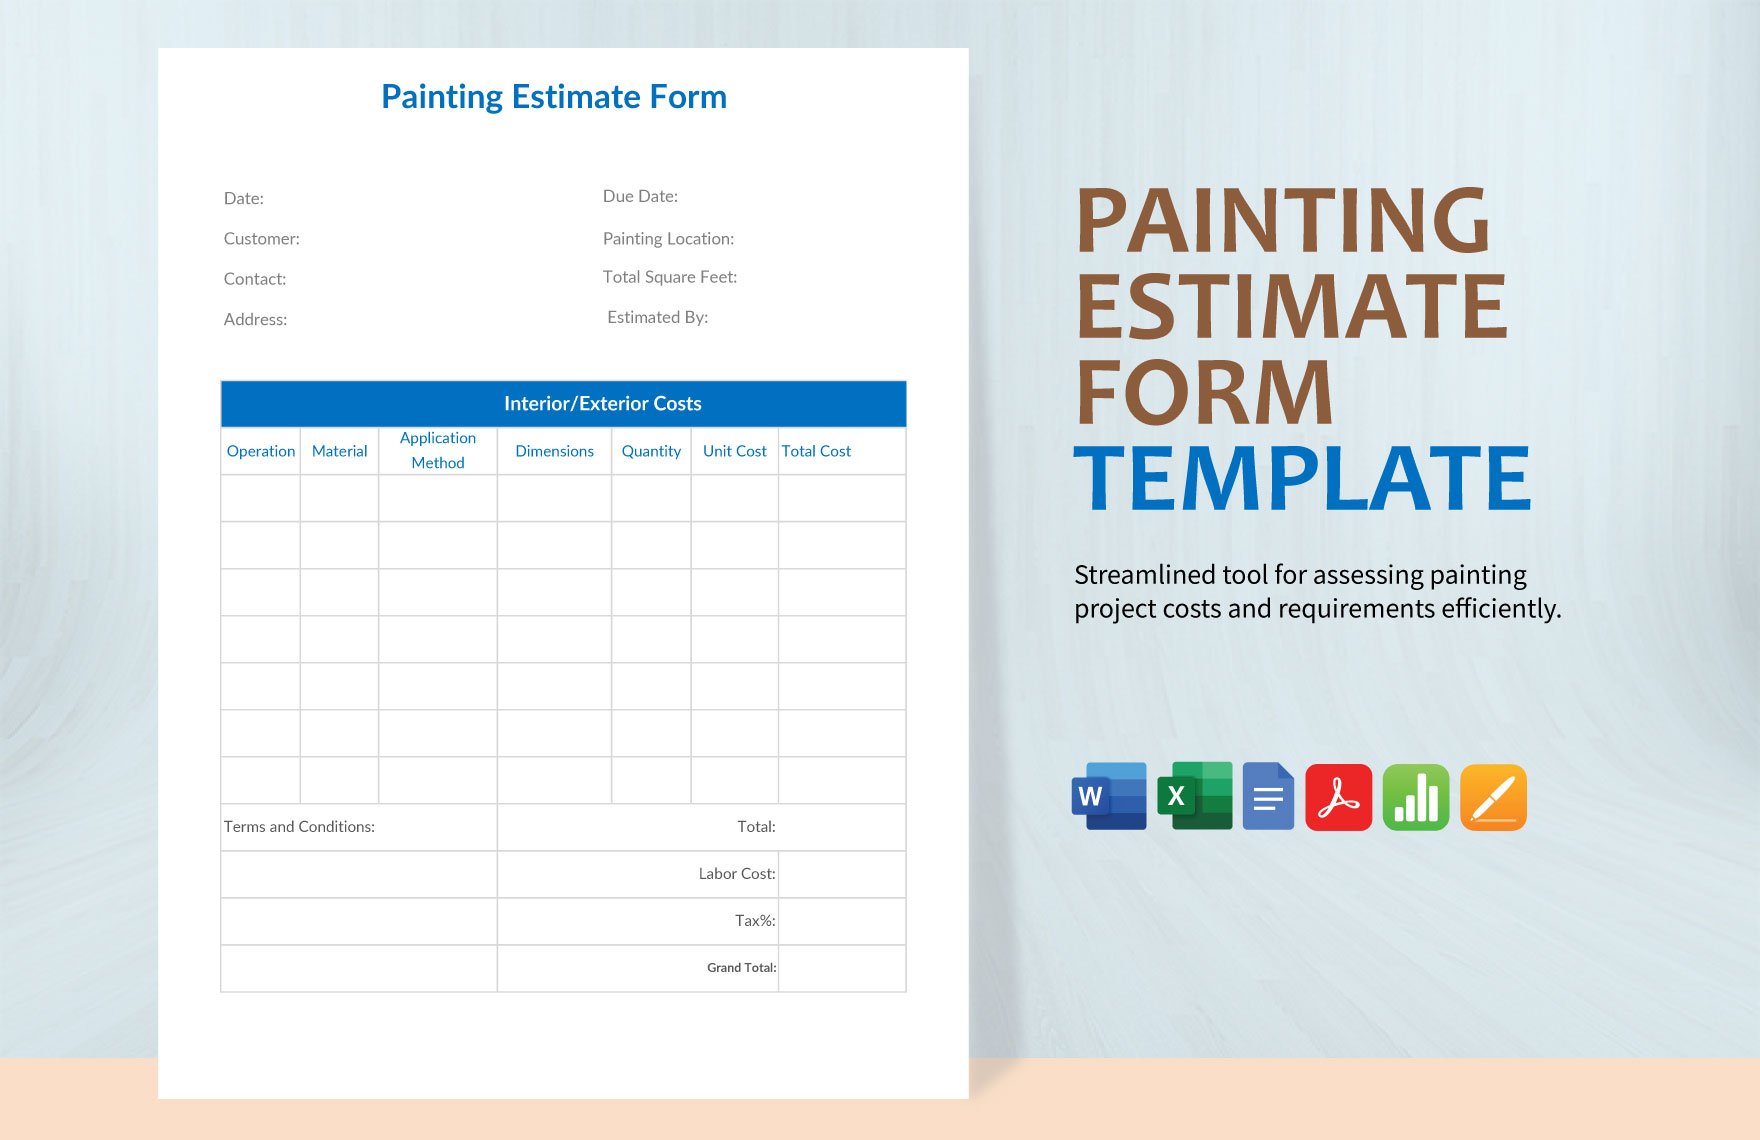 Painting Estimate Form Template in Word, Google Docs, Excel, PDF, Apple Pages, Apple Numbers